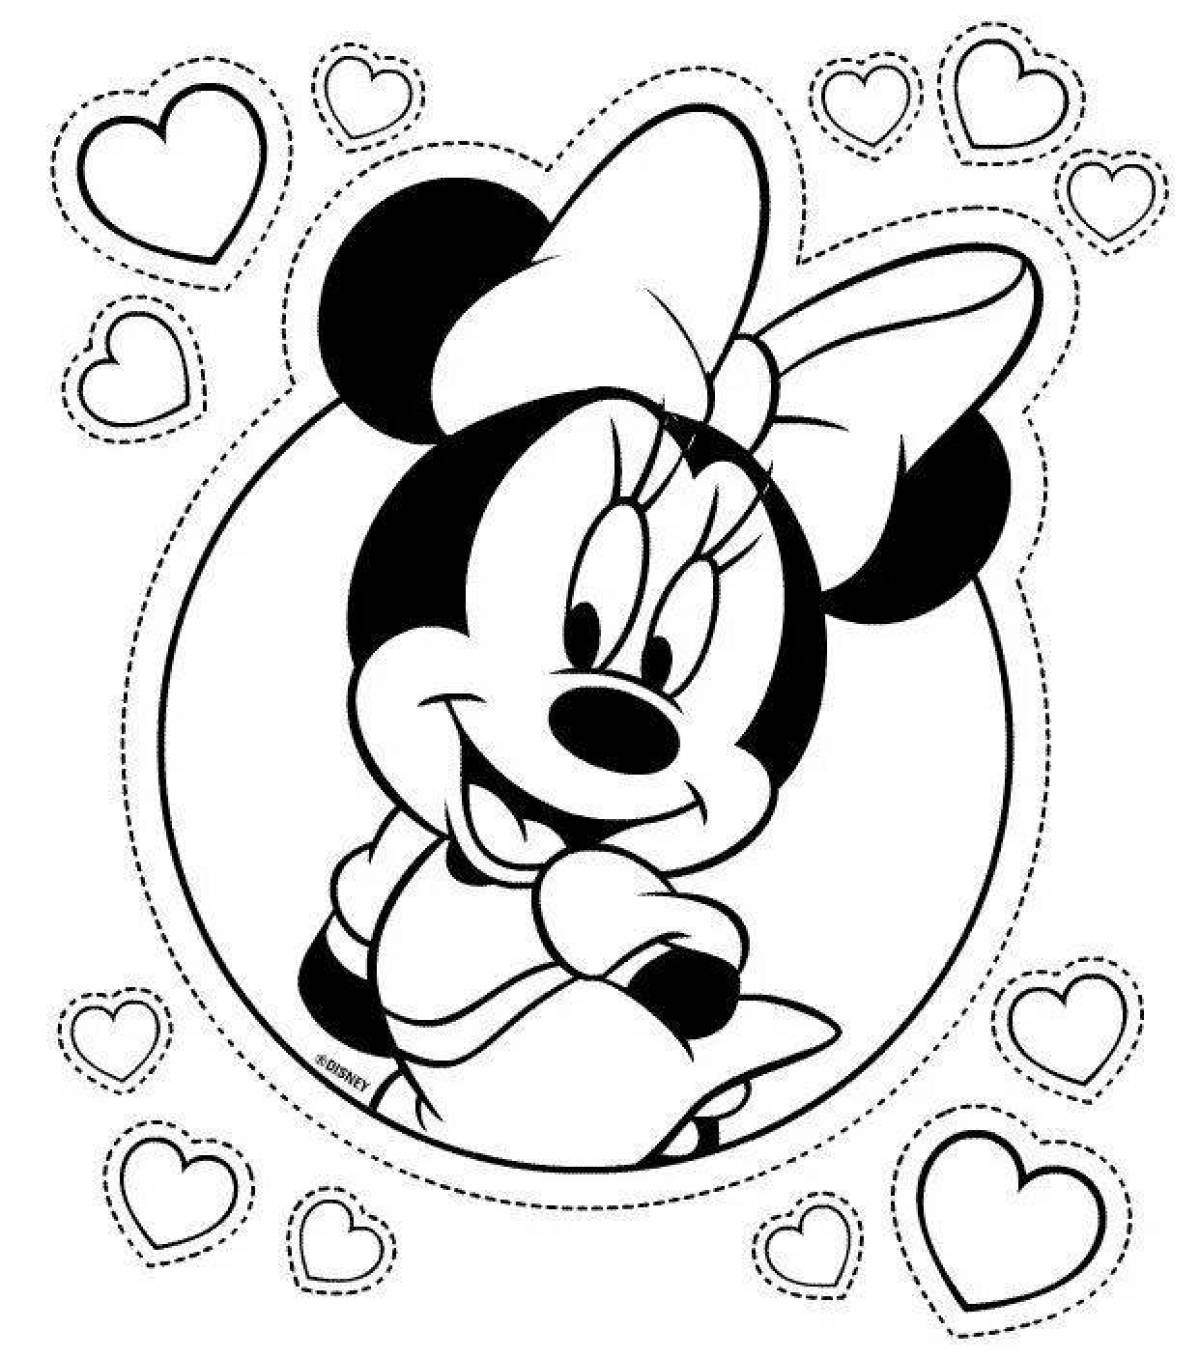 Exquisite mickey mouse coloring book for kids